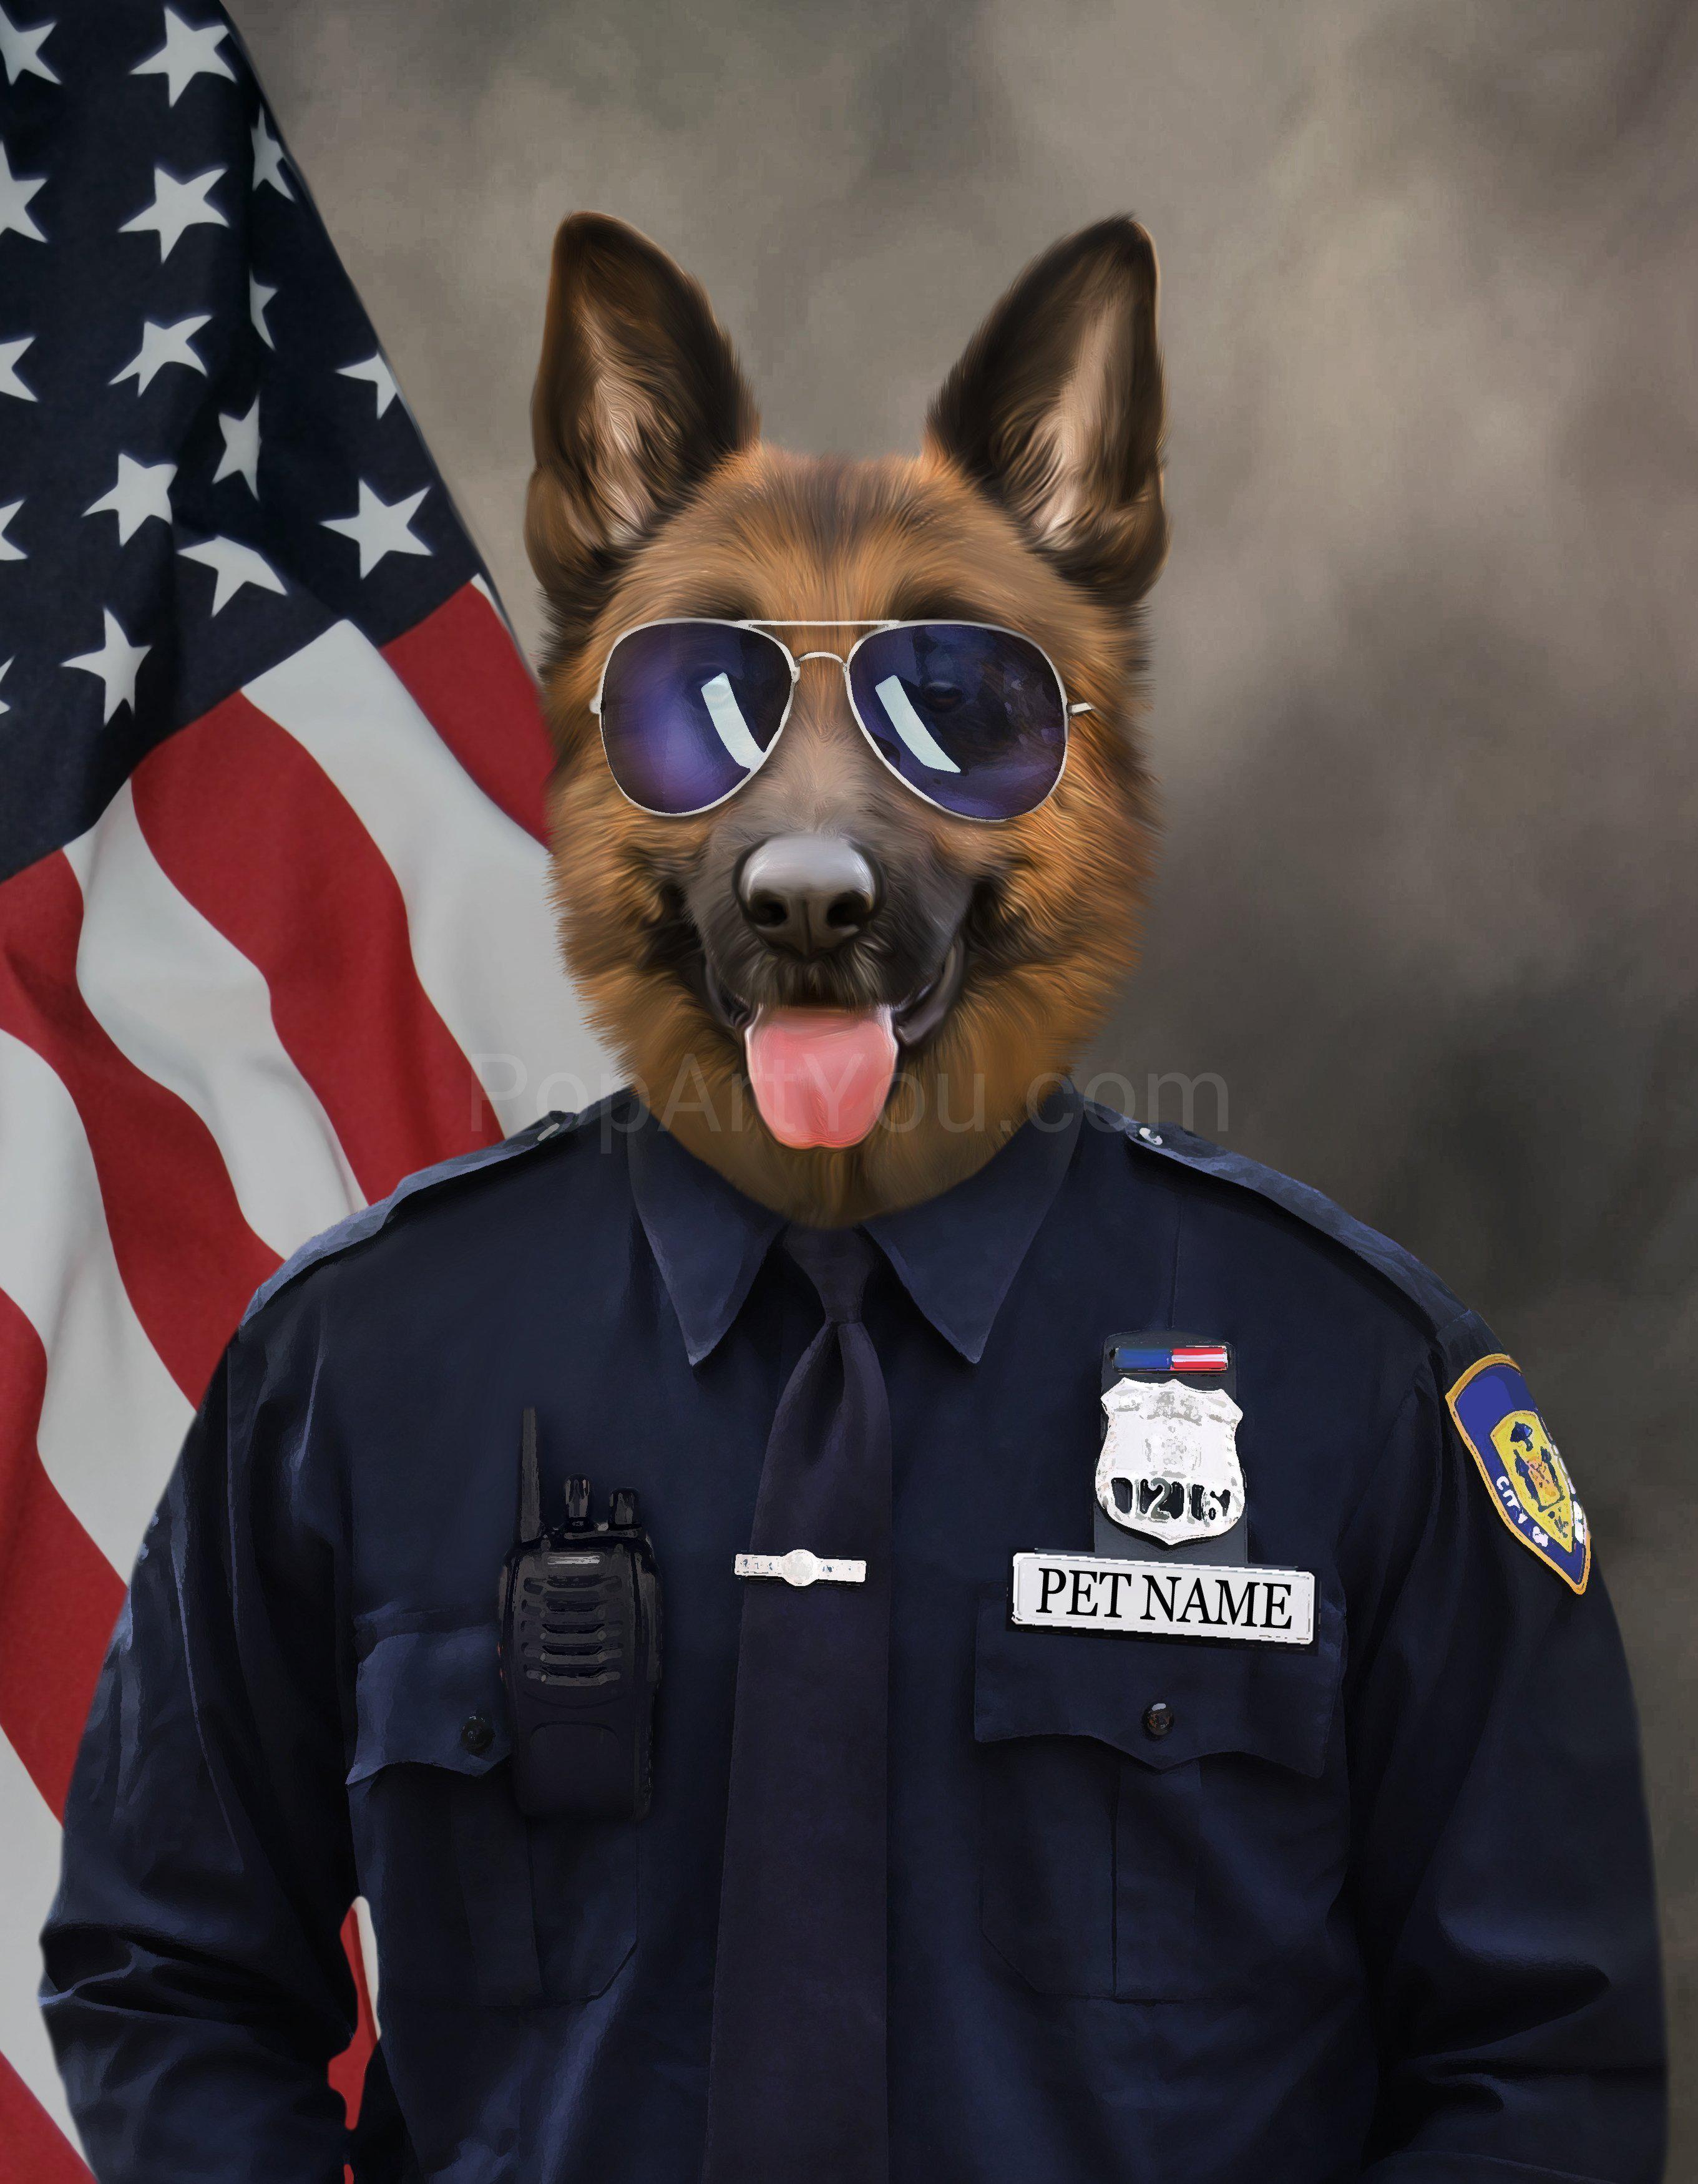 The portrait shows a dog dressed in police attire standing near the American flag